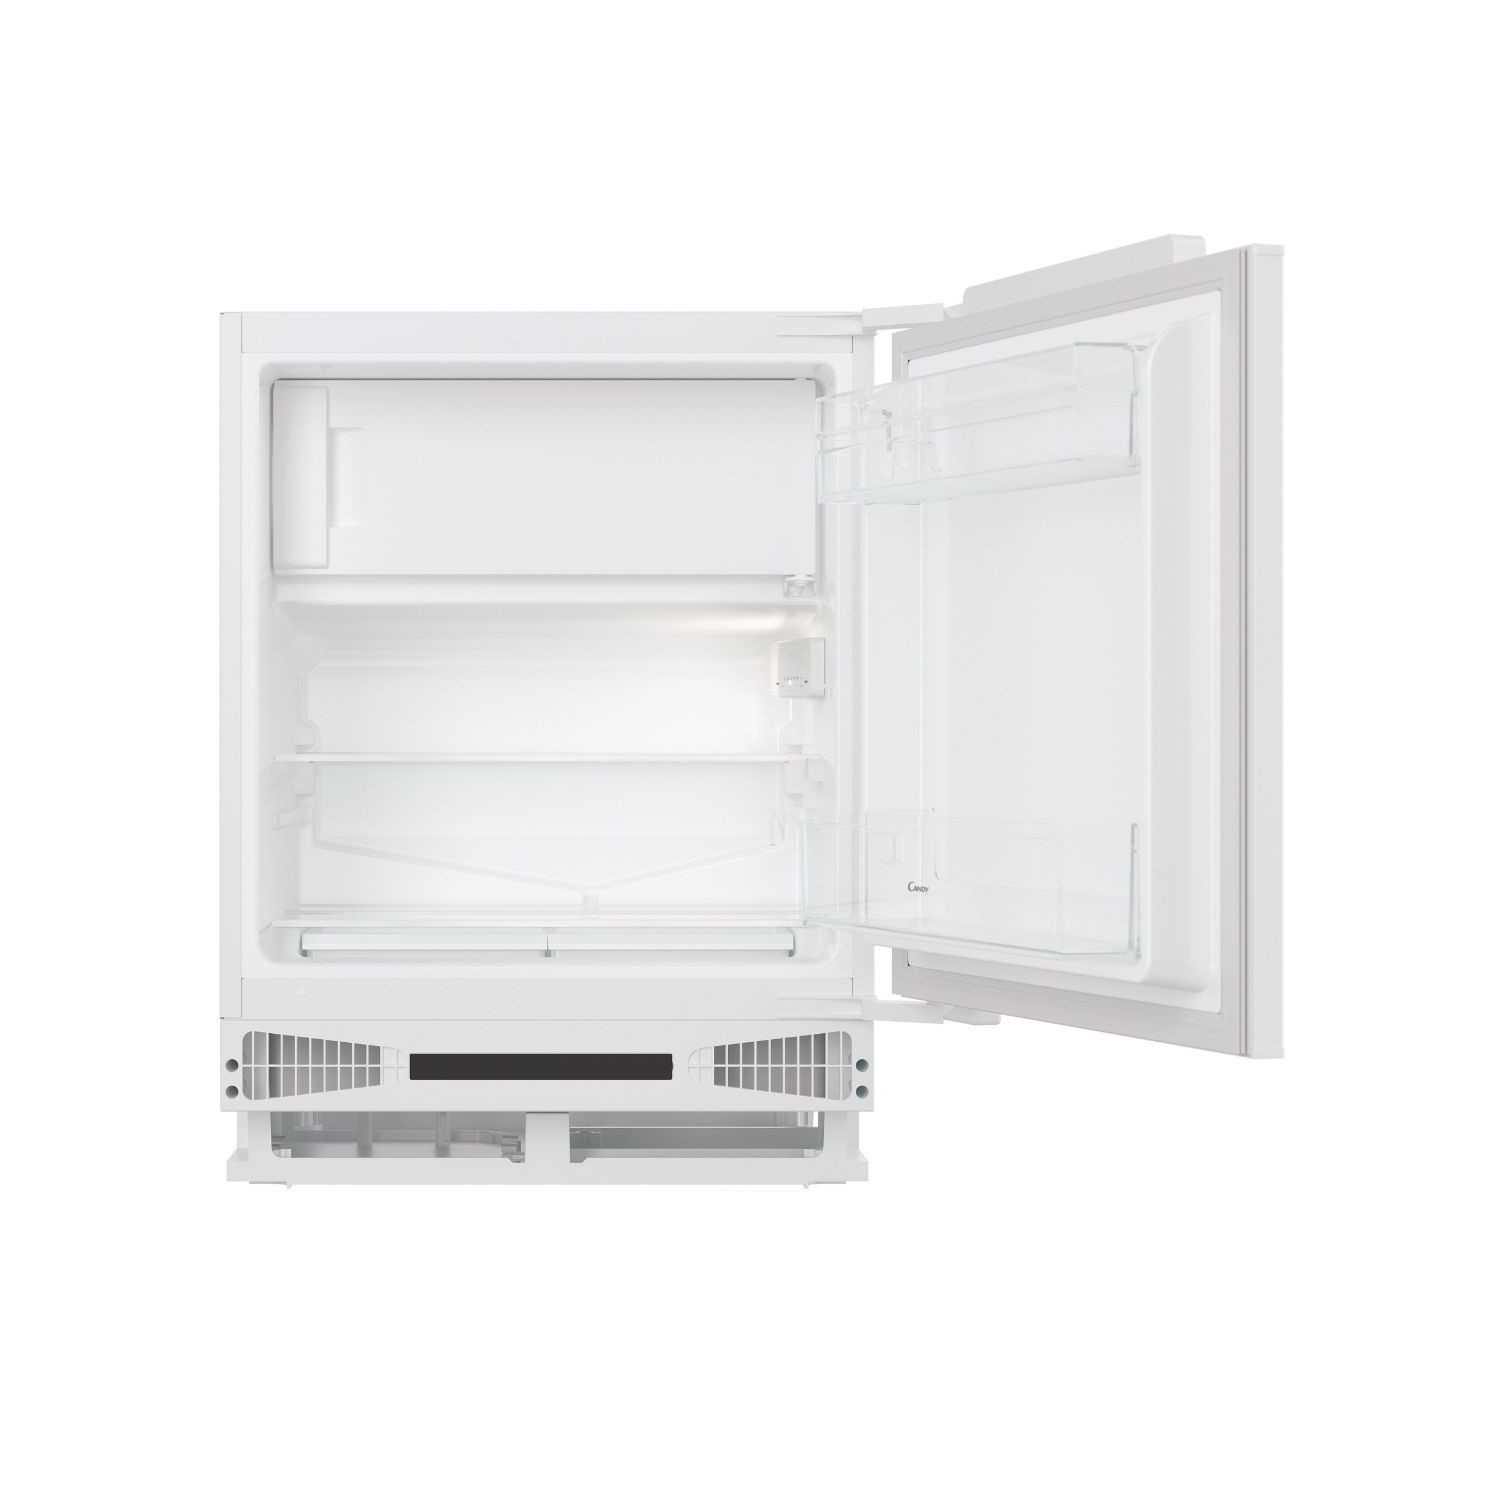 Photos - Other for Computer Candy 95 Litre Integrated Under Counter Fridge with Ice Box 34901620 